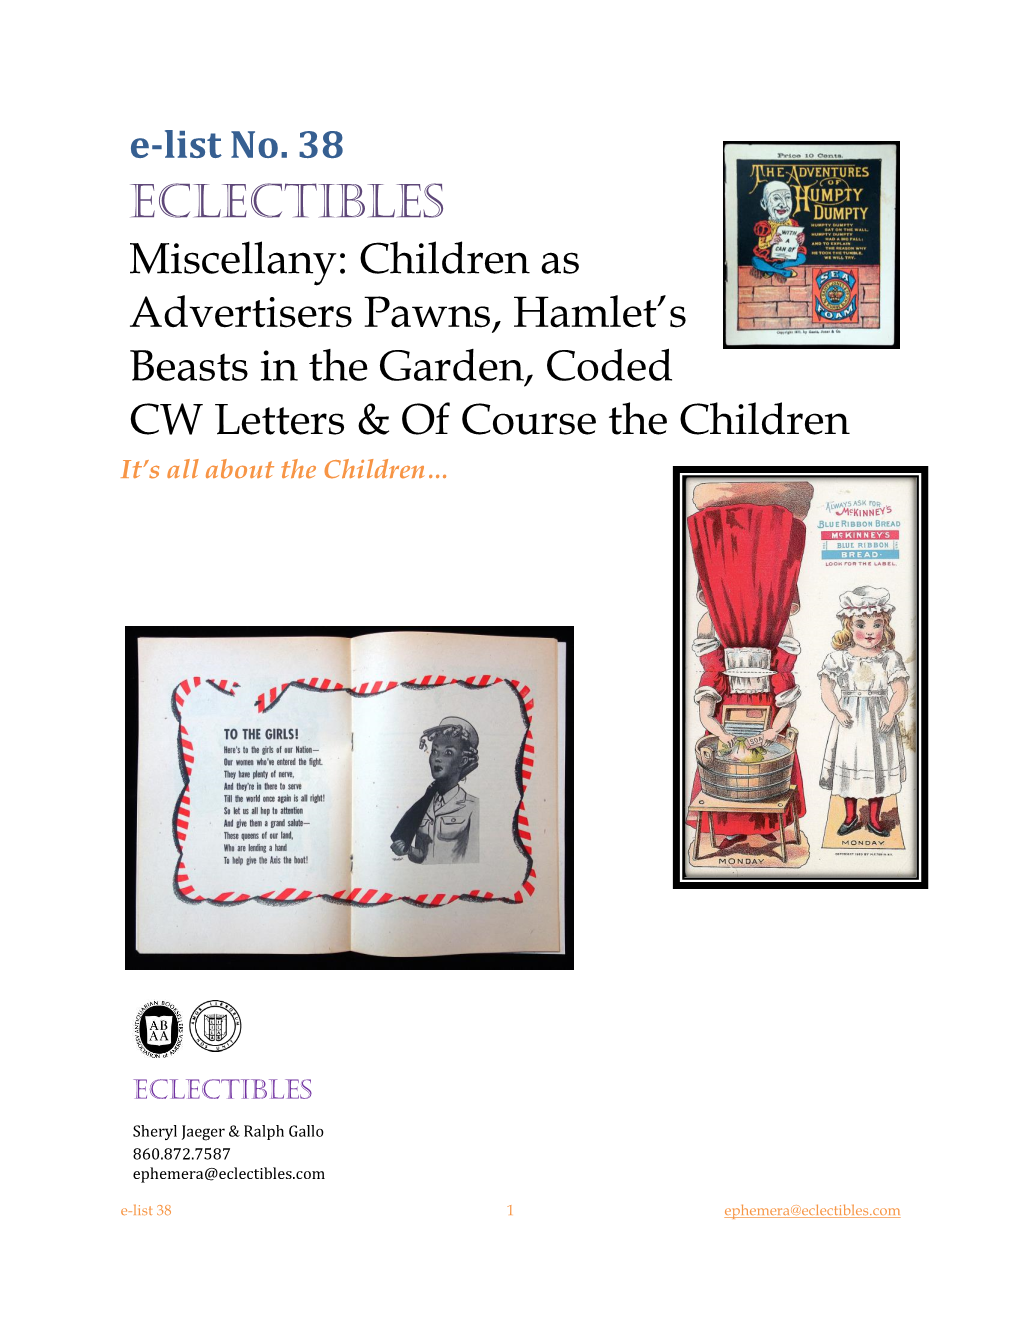 Eclectibles Miscellany: Children As Advertisers Pawns, Hamlet’S Beasts in the Garden, Coded CW Letters & of Course the Children